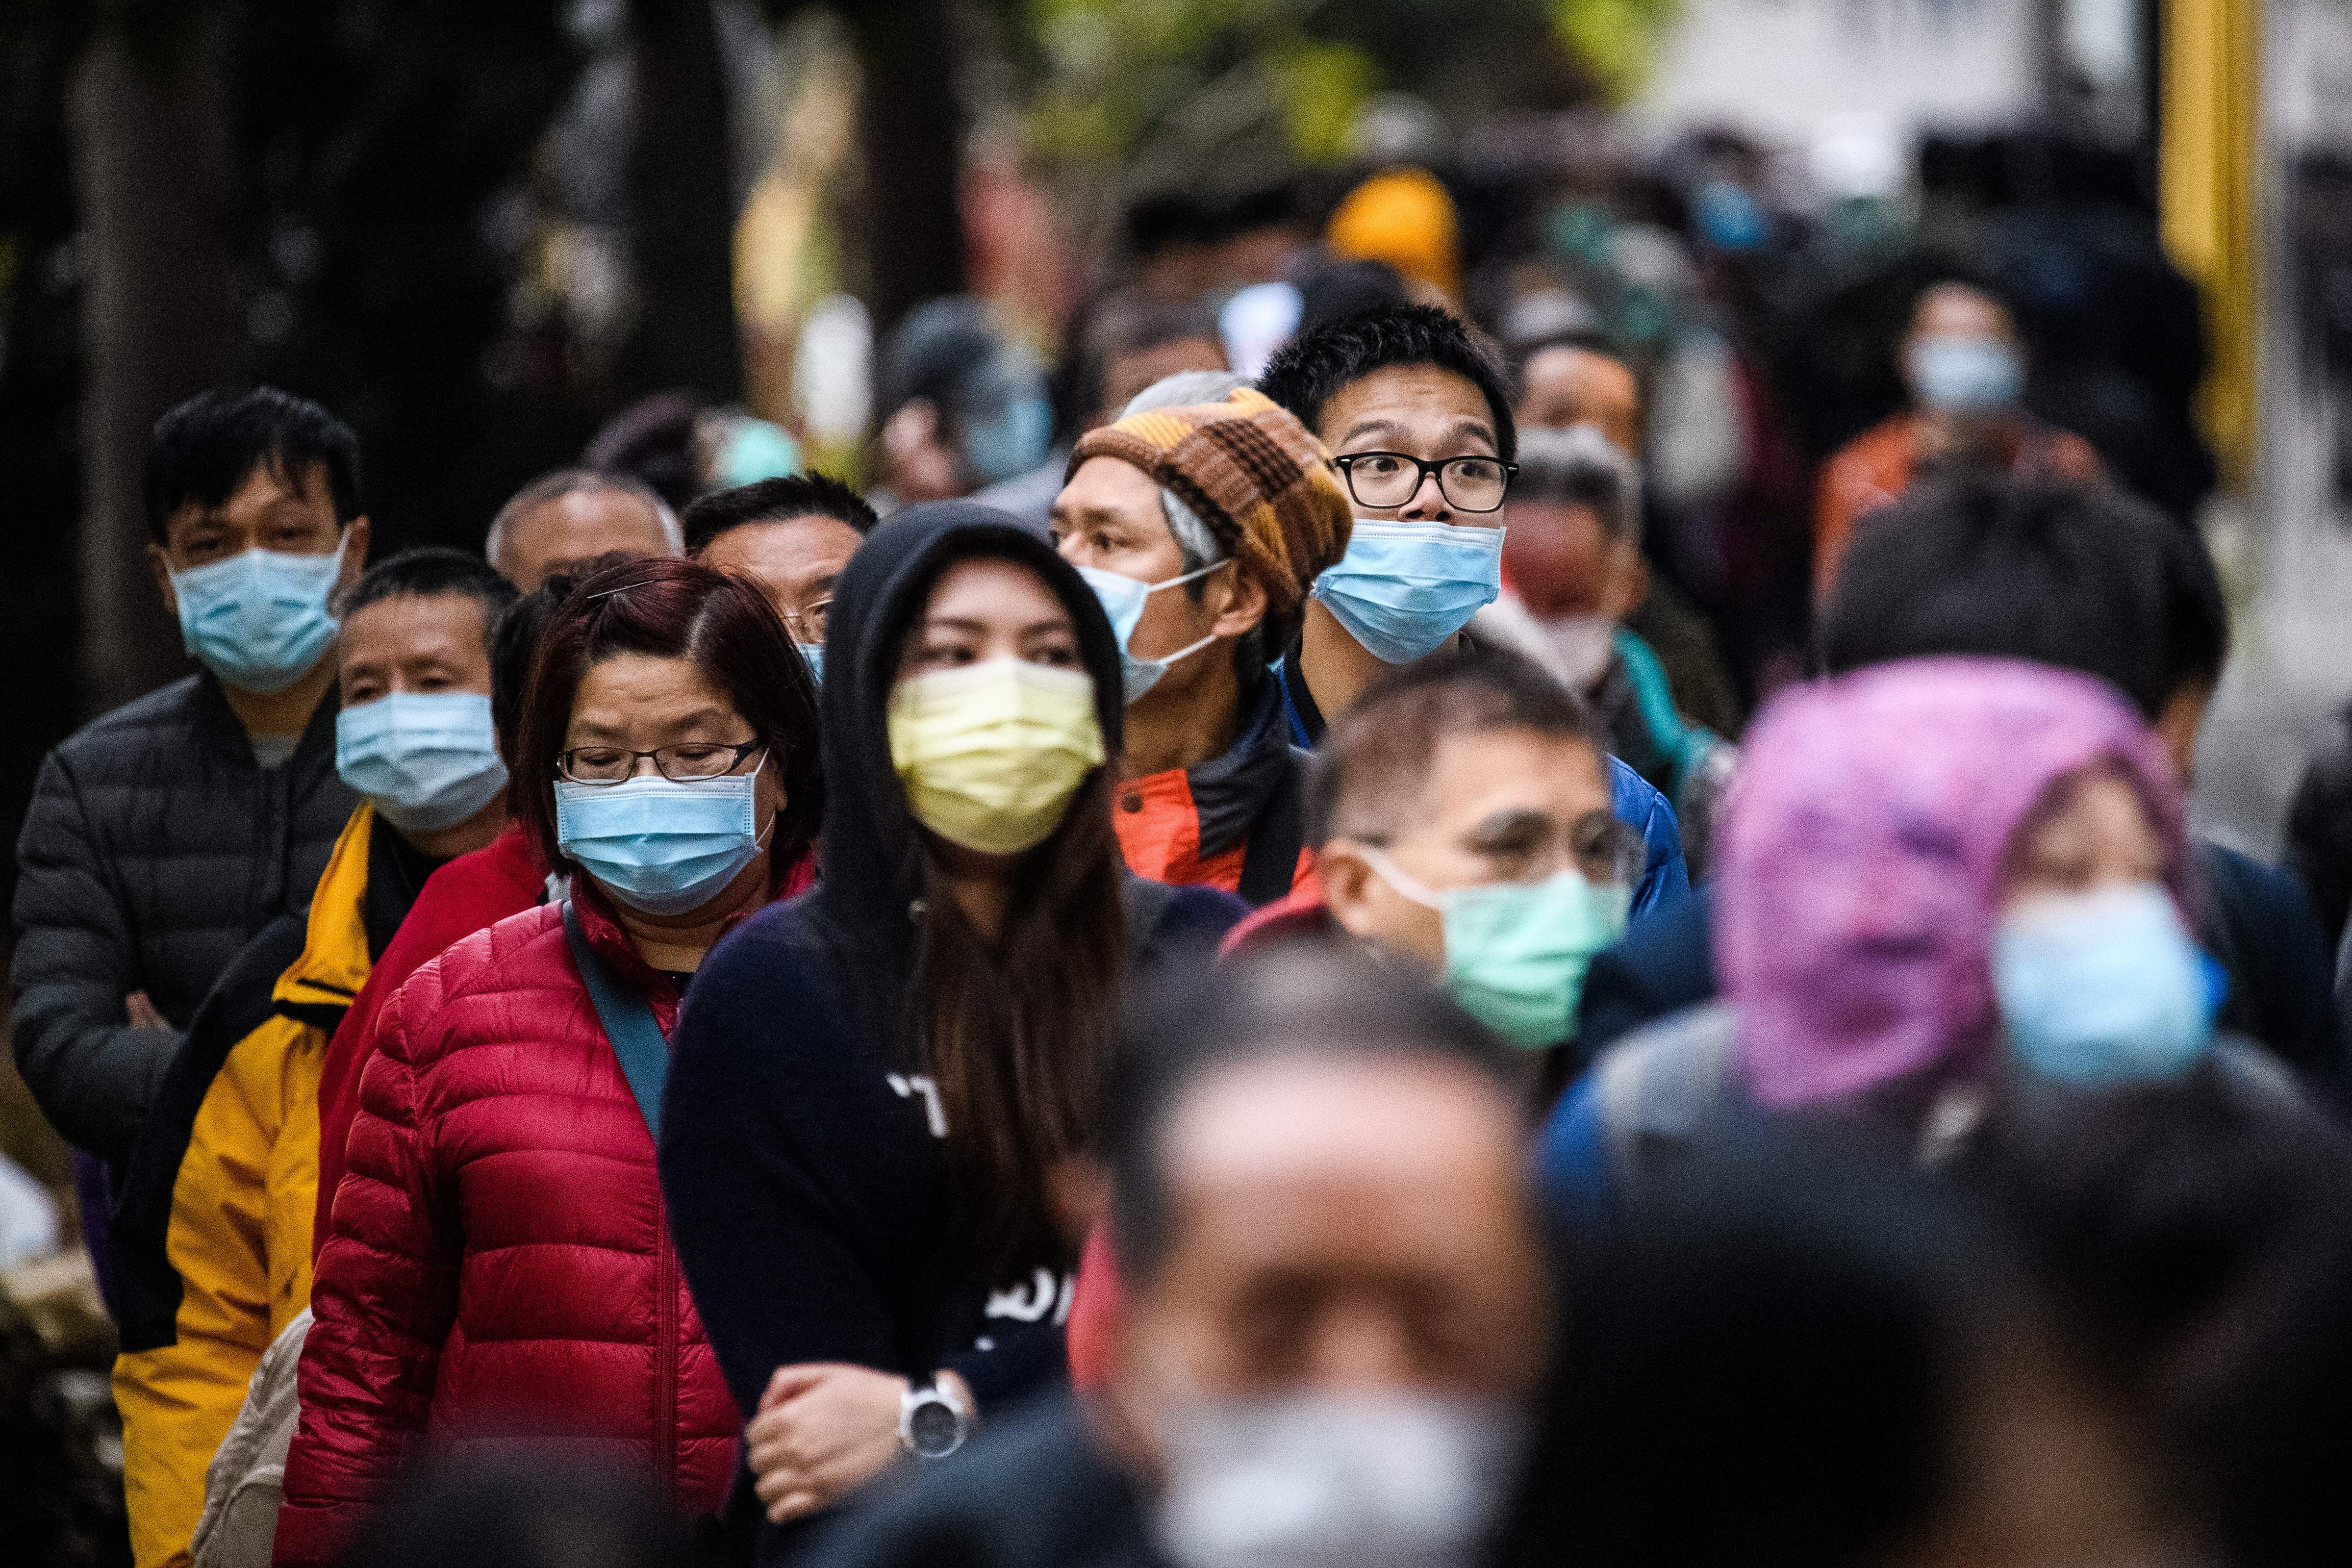 People wearing face masks in Hong Kong on February 5, 2020.